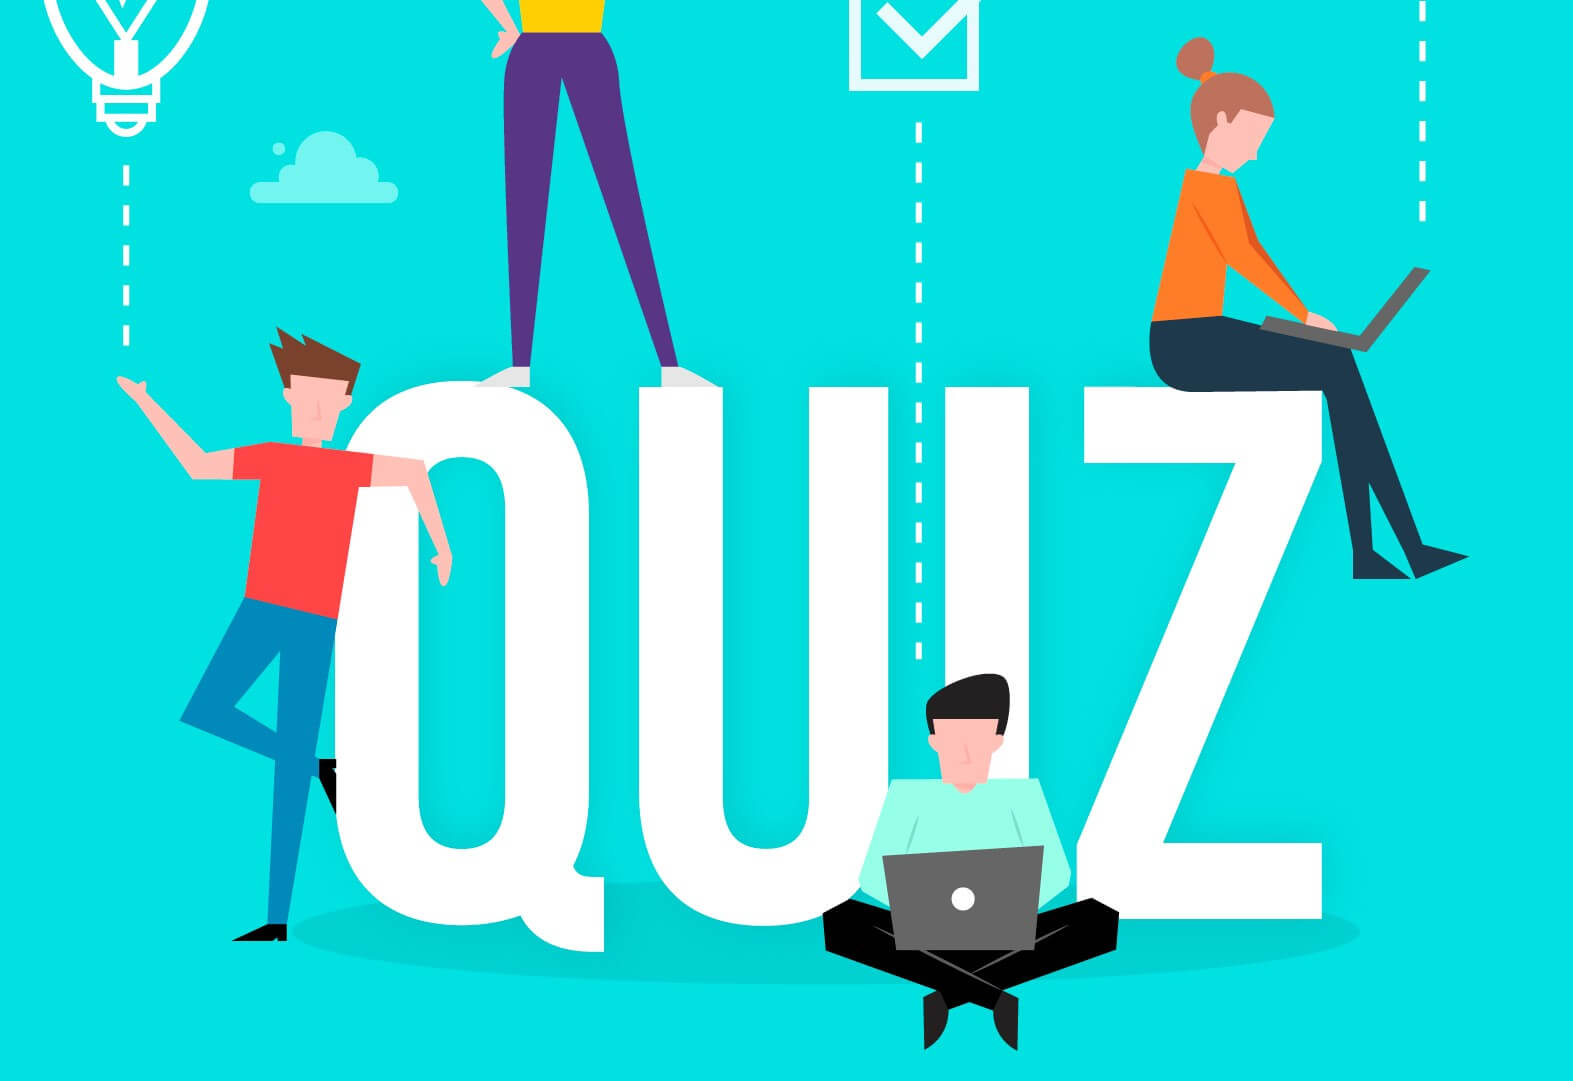 Consulting Project Termination Phase| Quiz